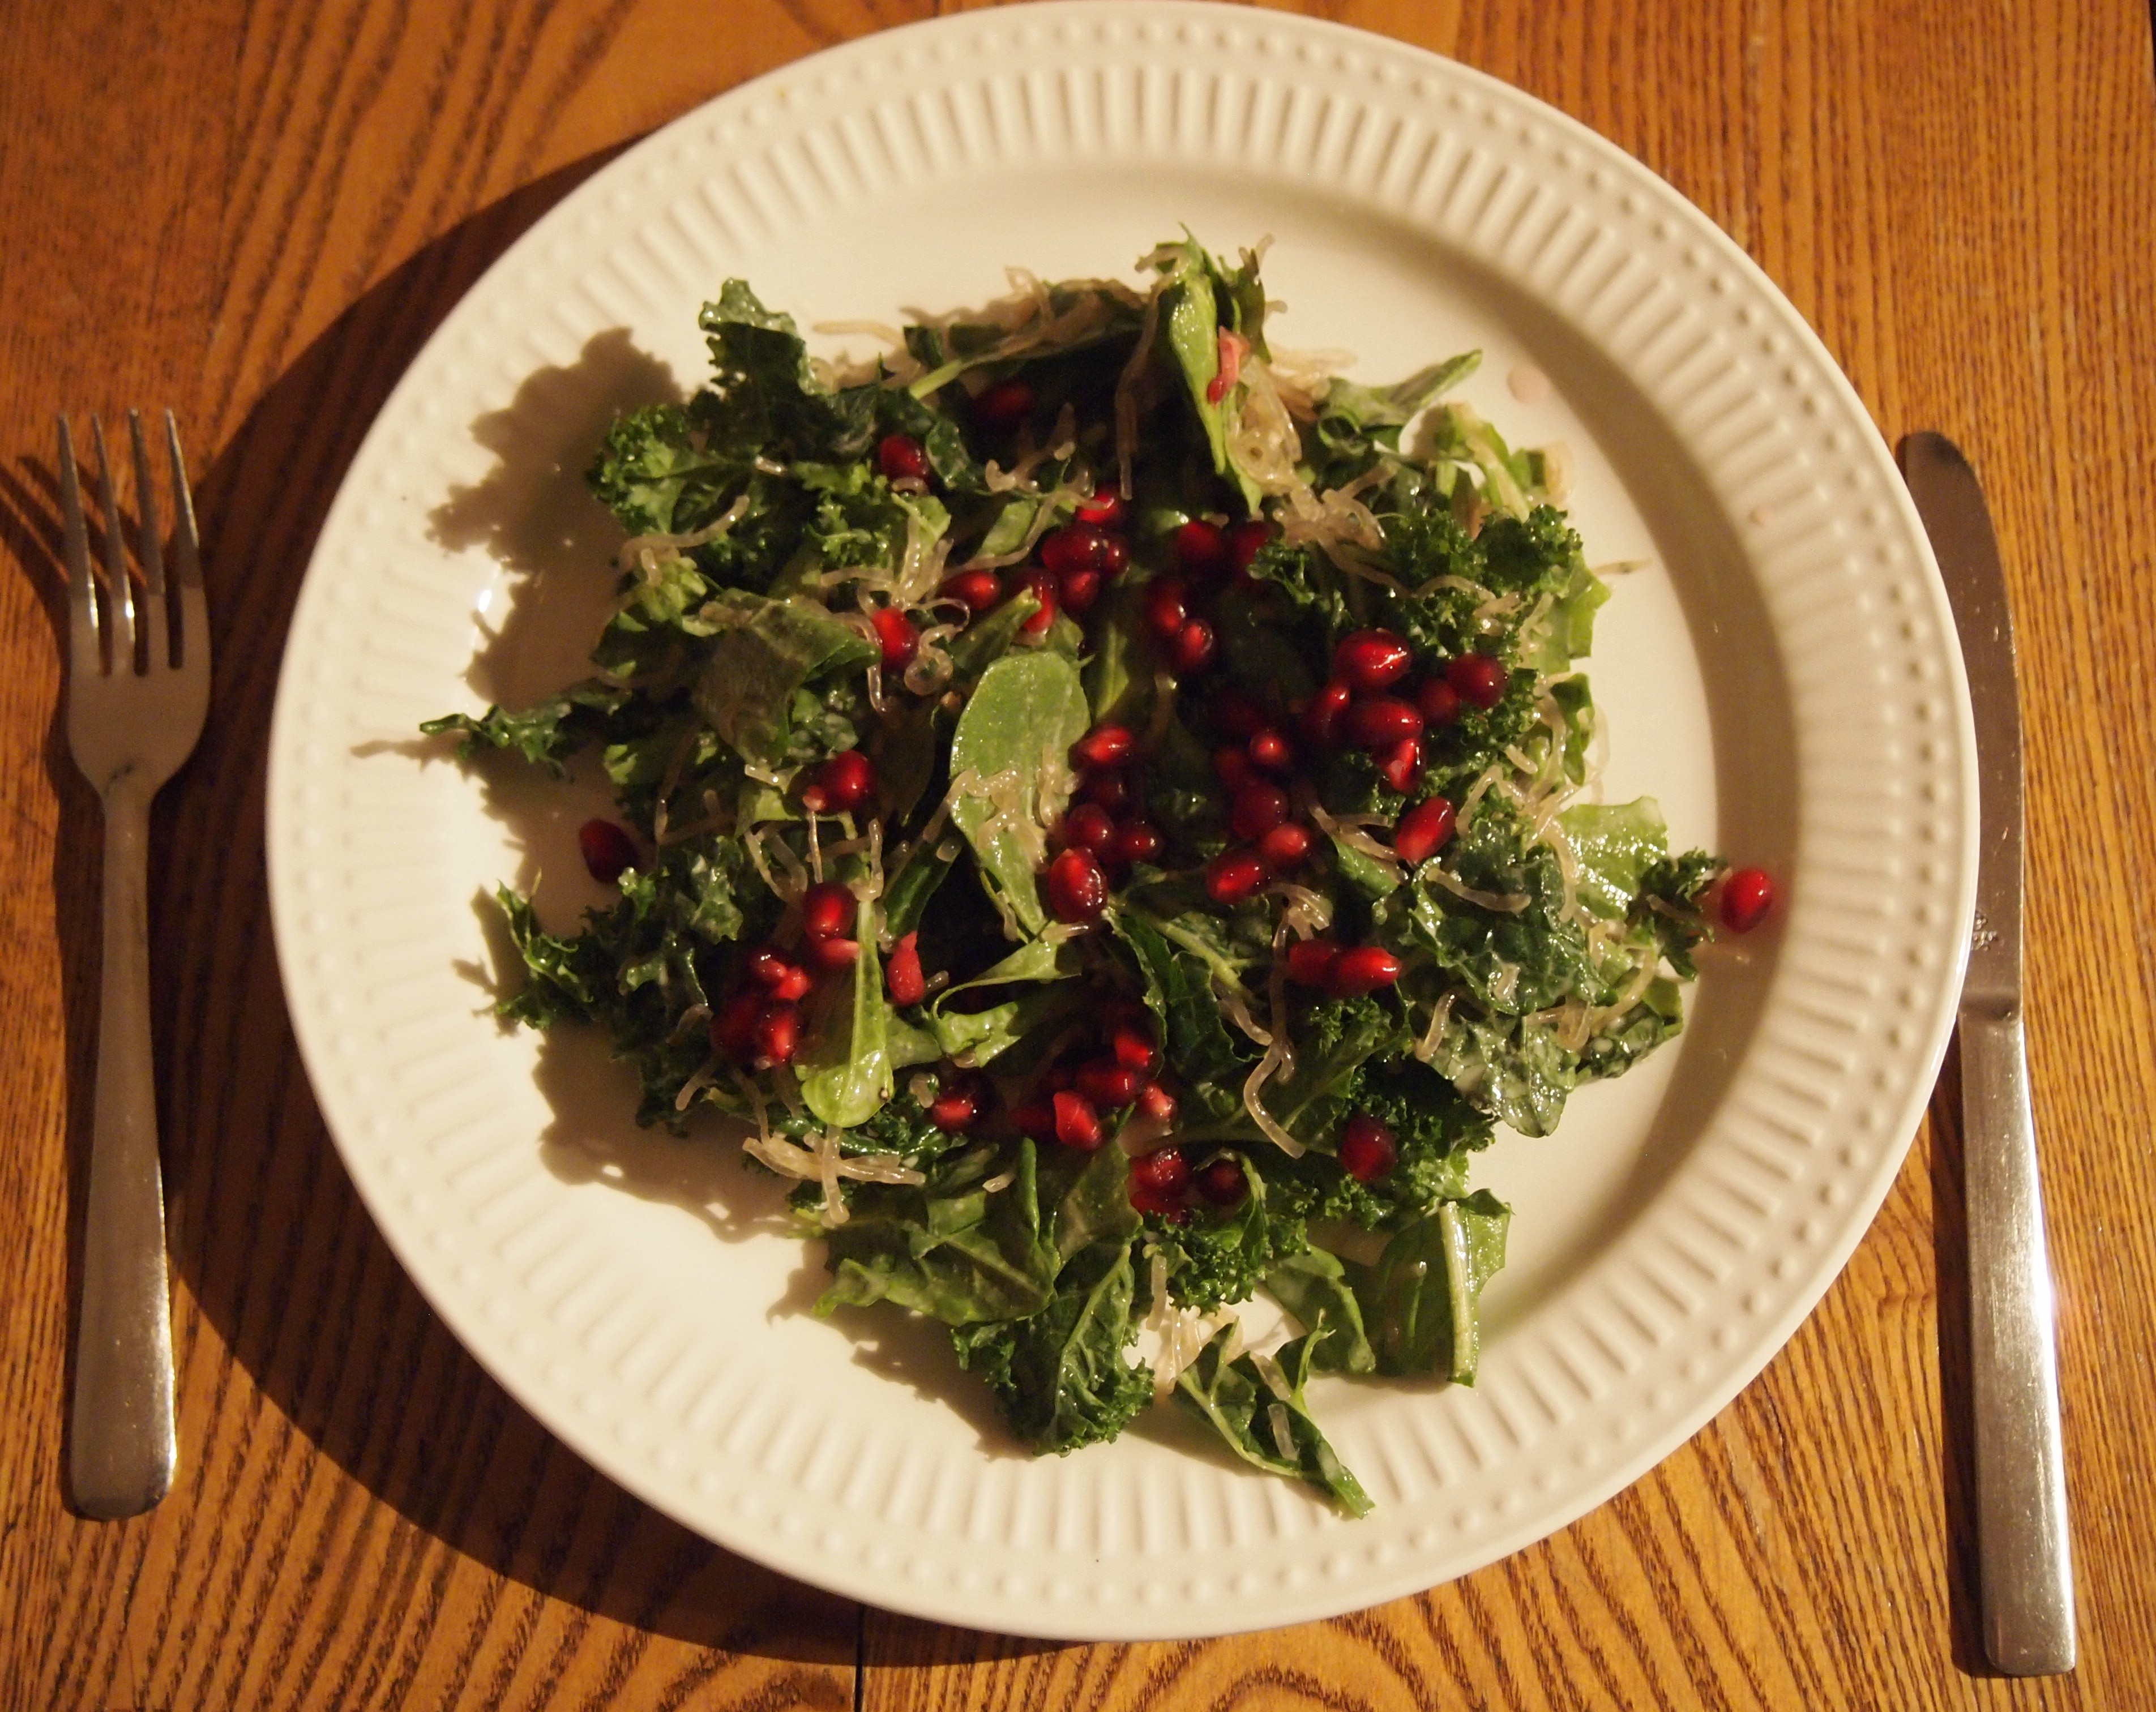 Red Pomegranate, Leafy Greens and Kelp Noodle Salad - so colourful